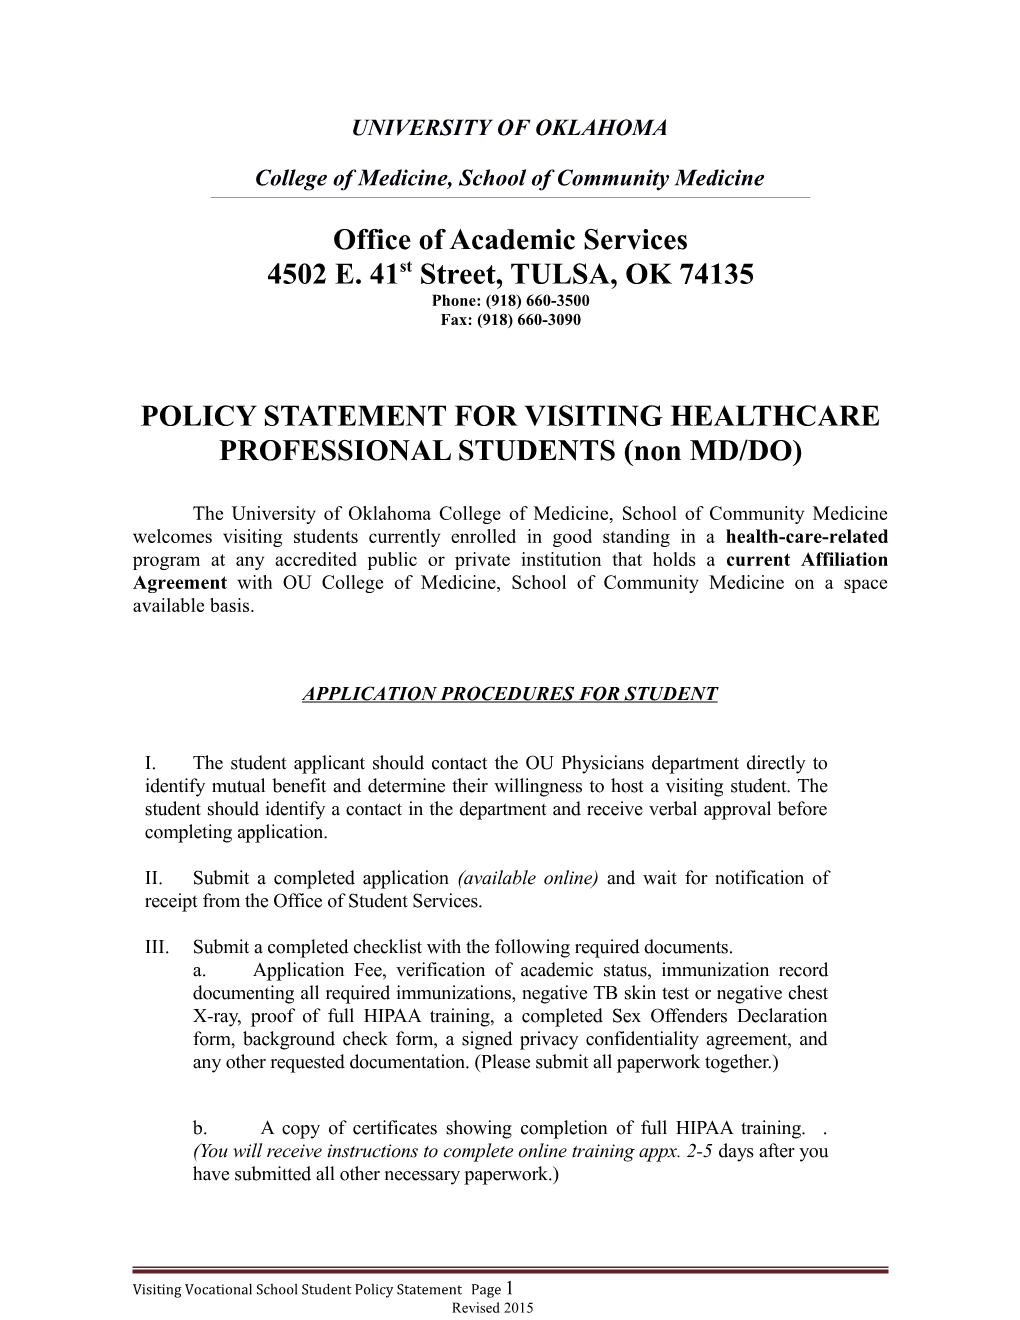 Policy Statement for Visiting Senior Medical Students s1